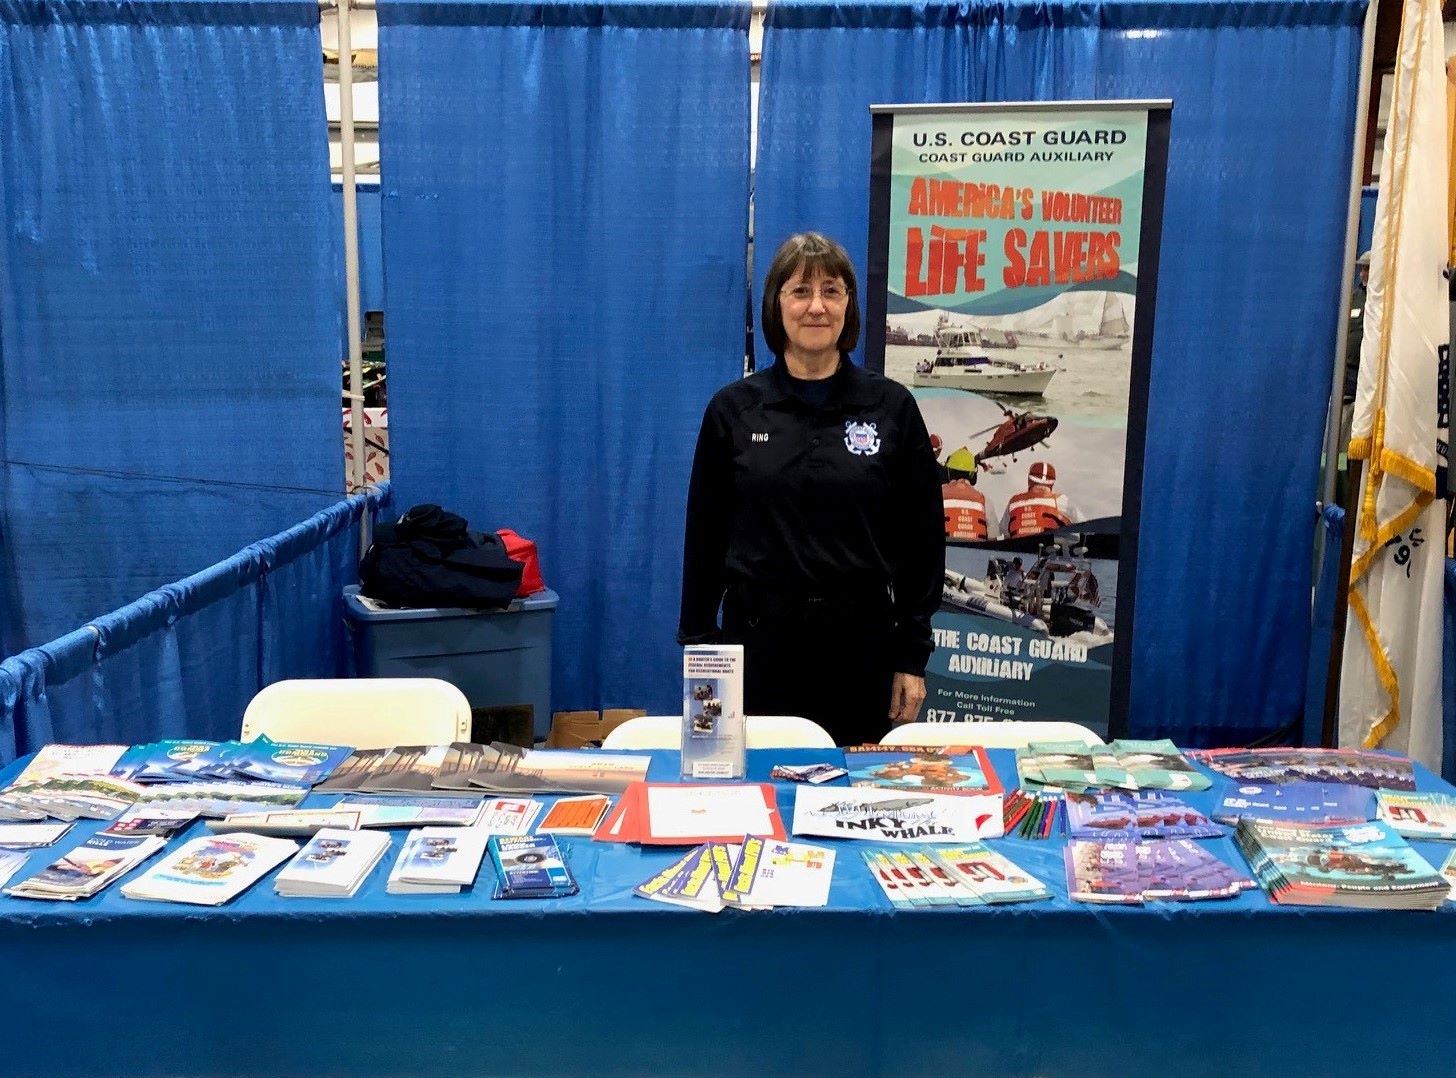 Aux member behind boating safety table